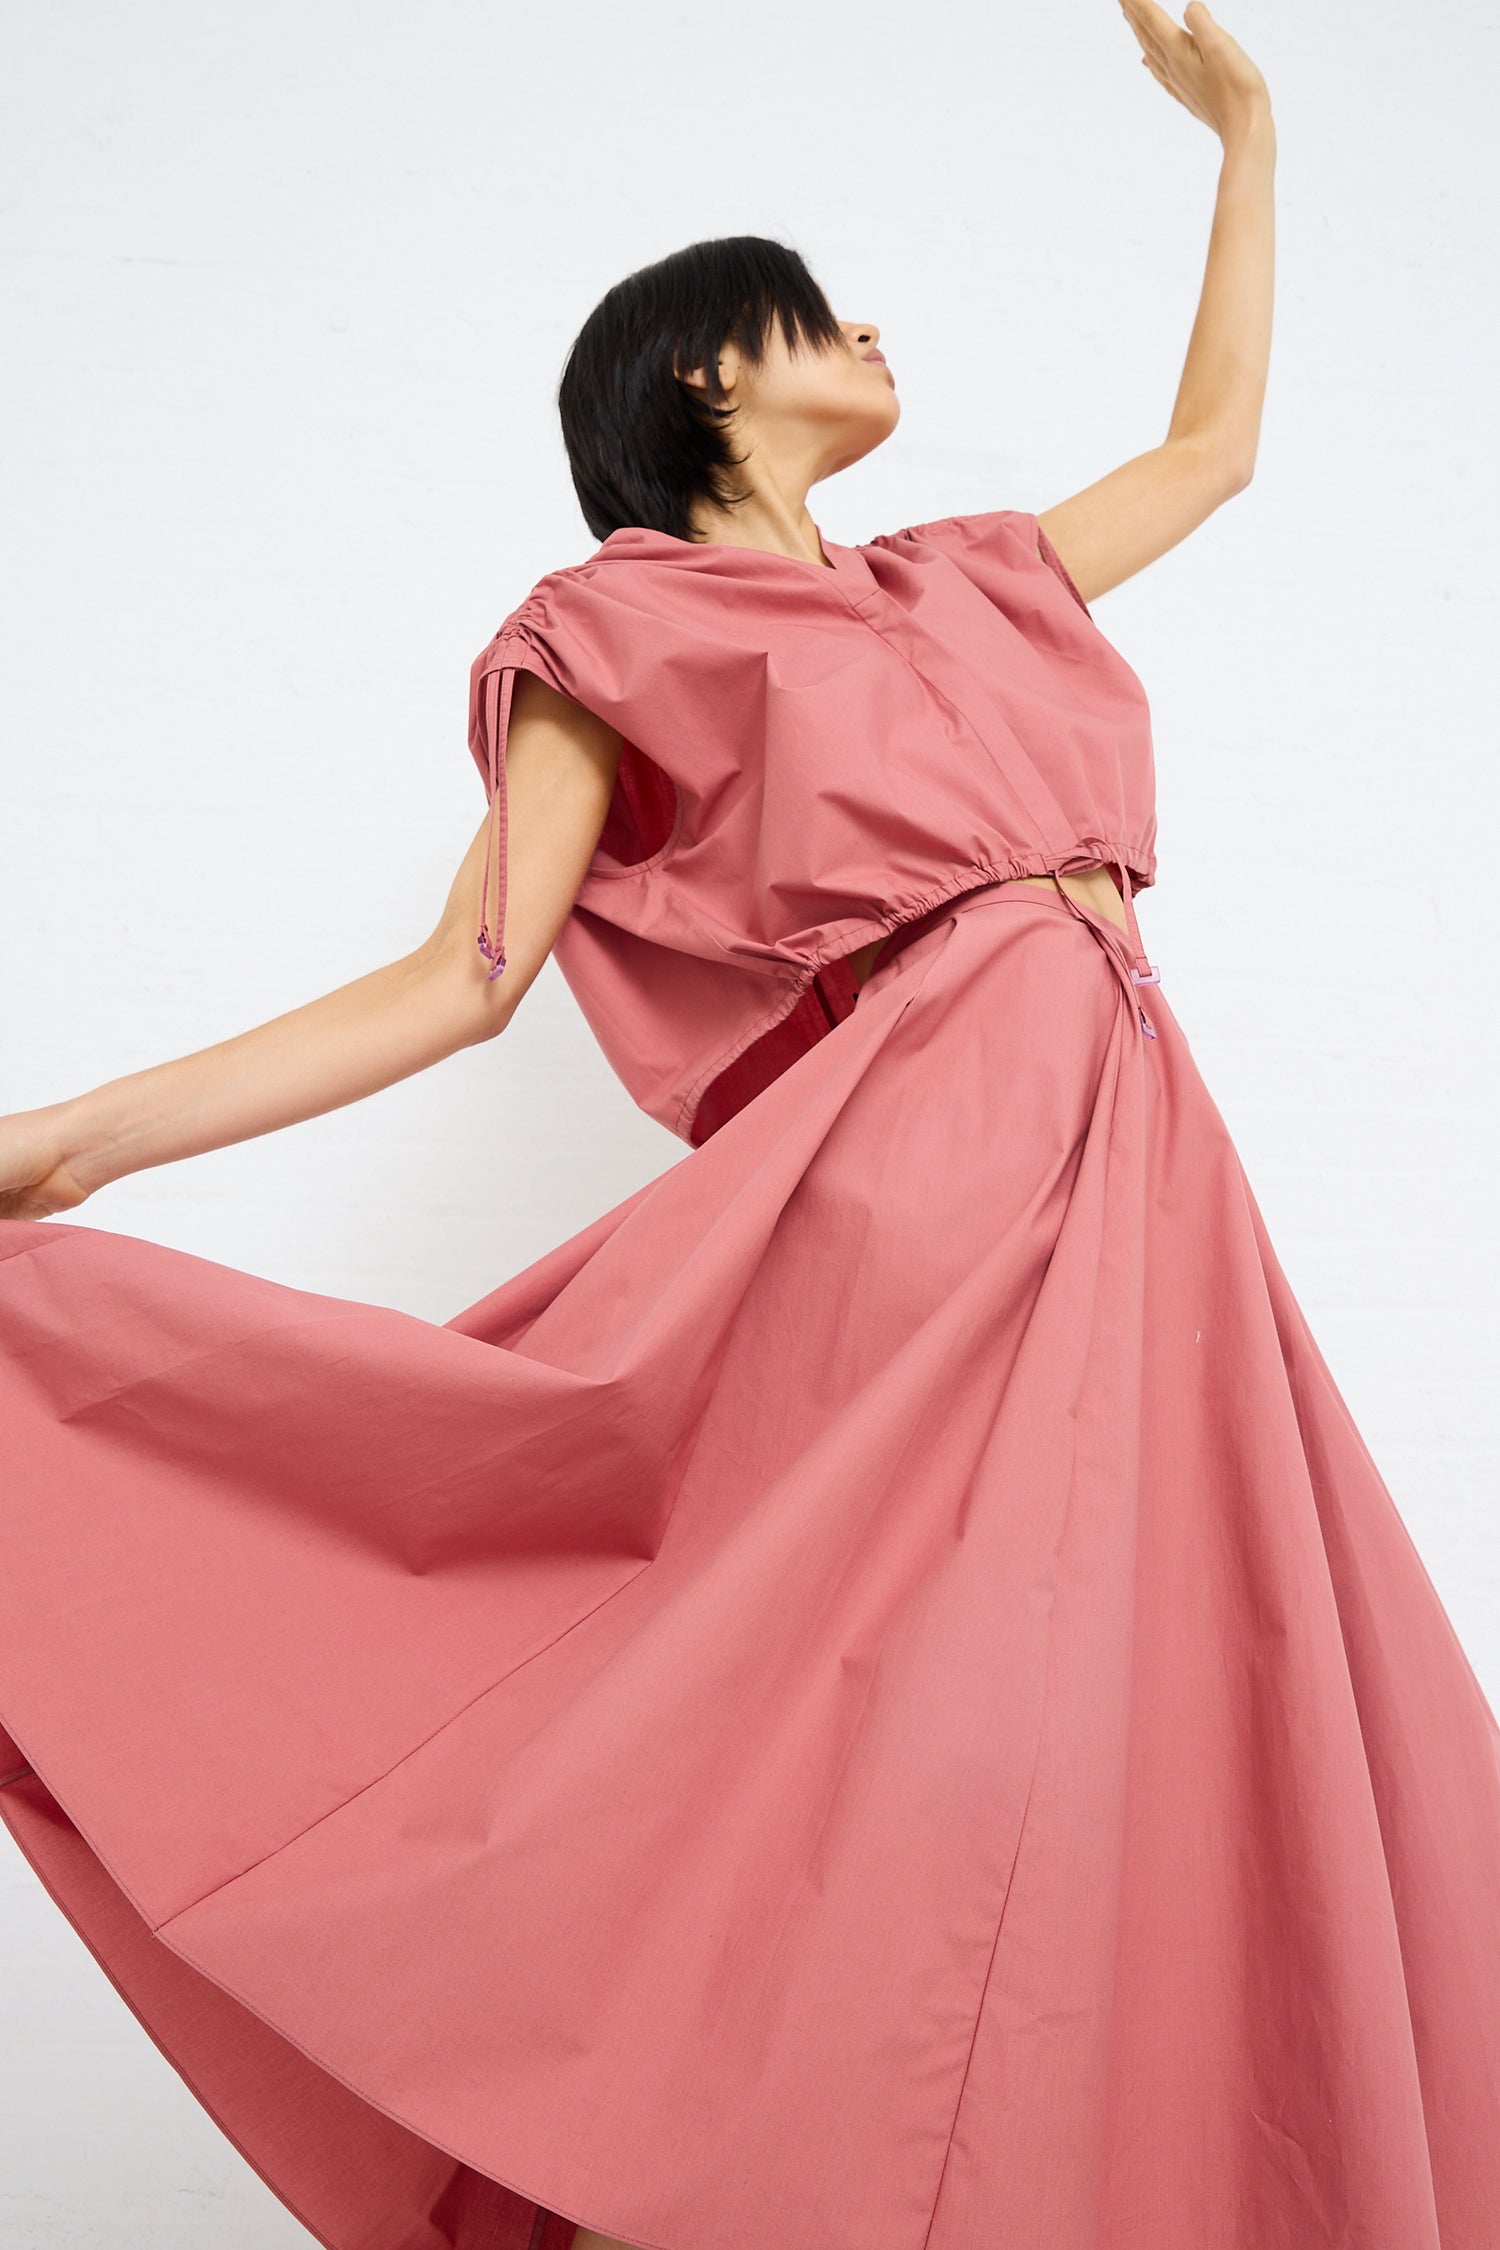 Woman in a Cotton Poplin Gathered Top in Canyon by Veronique Leroy and flowing pink dress with adjustable ruche detail, her arm extended upwards against a white background.